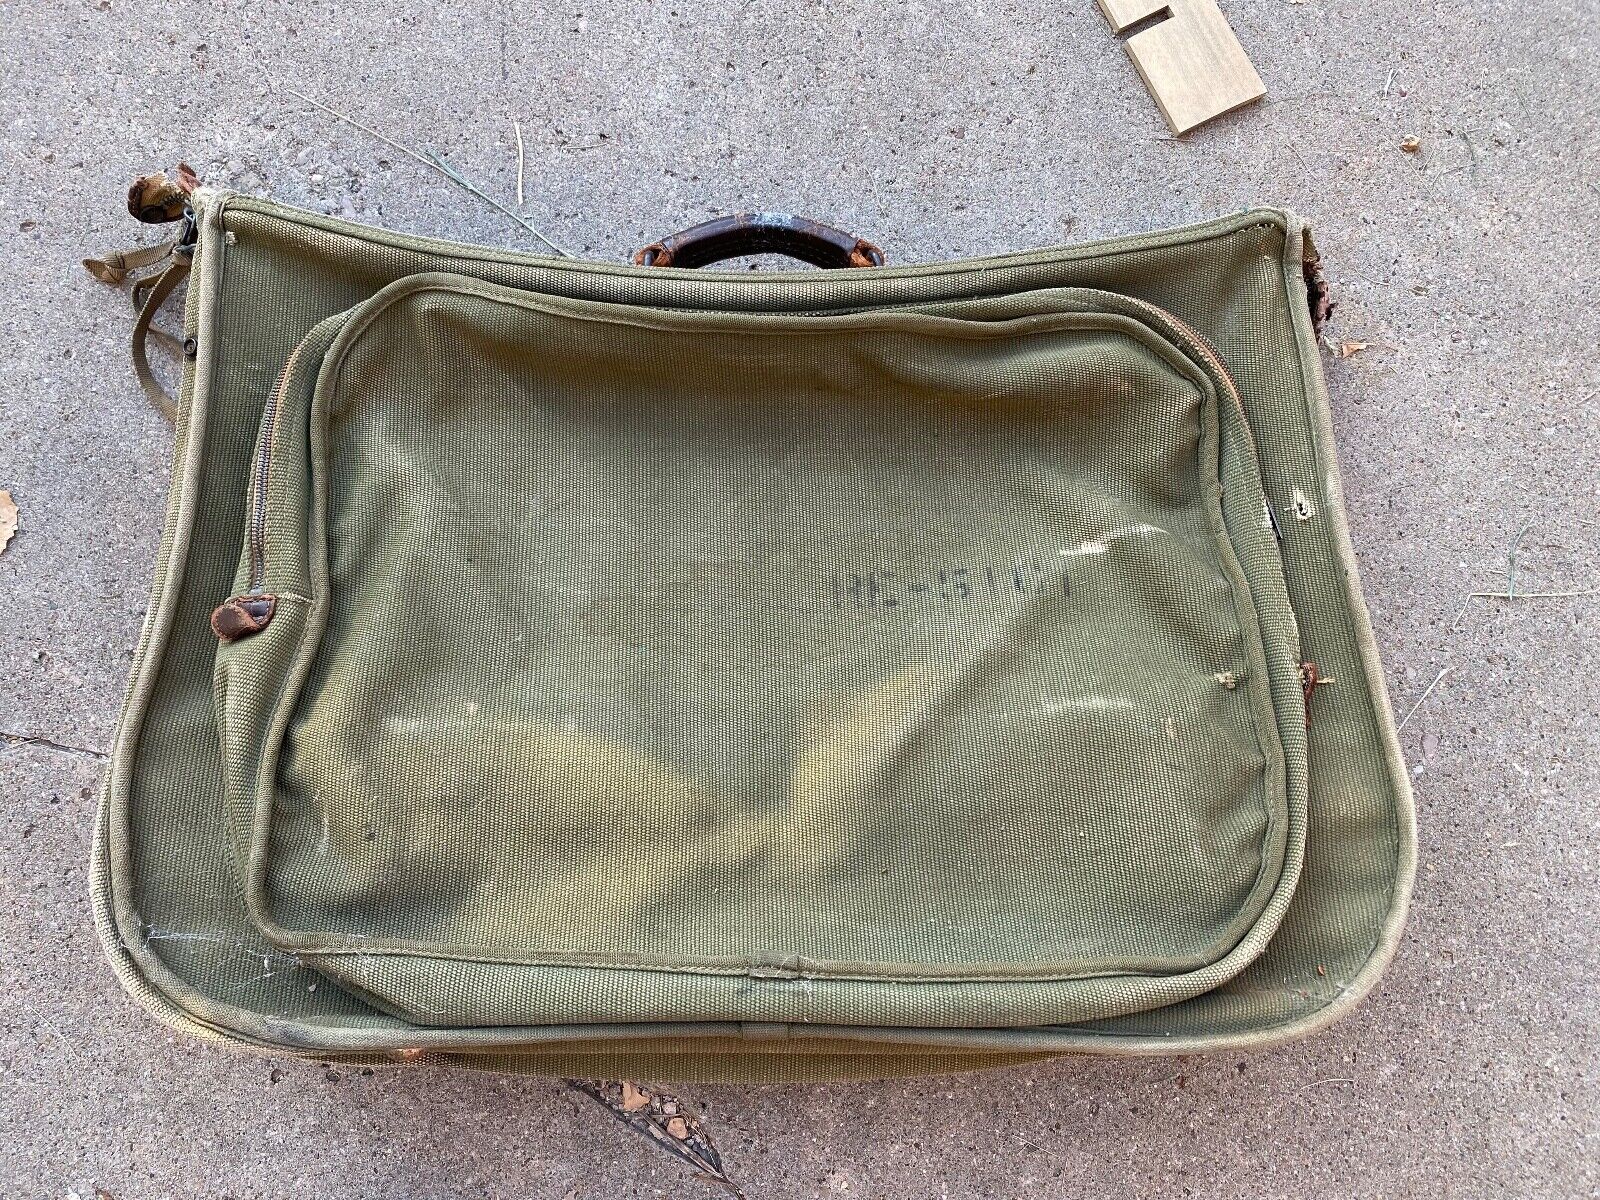 ORIGINAL WWII US ARMY AIR FORCE B-4 OFFICER LUGGAGE CARRY BAG-